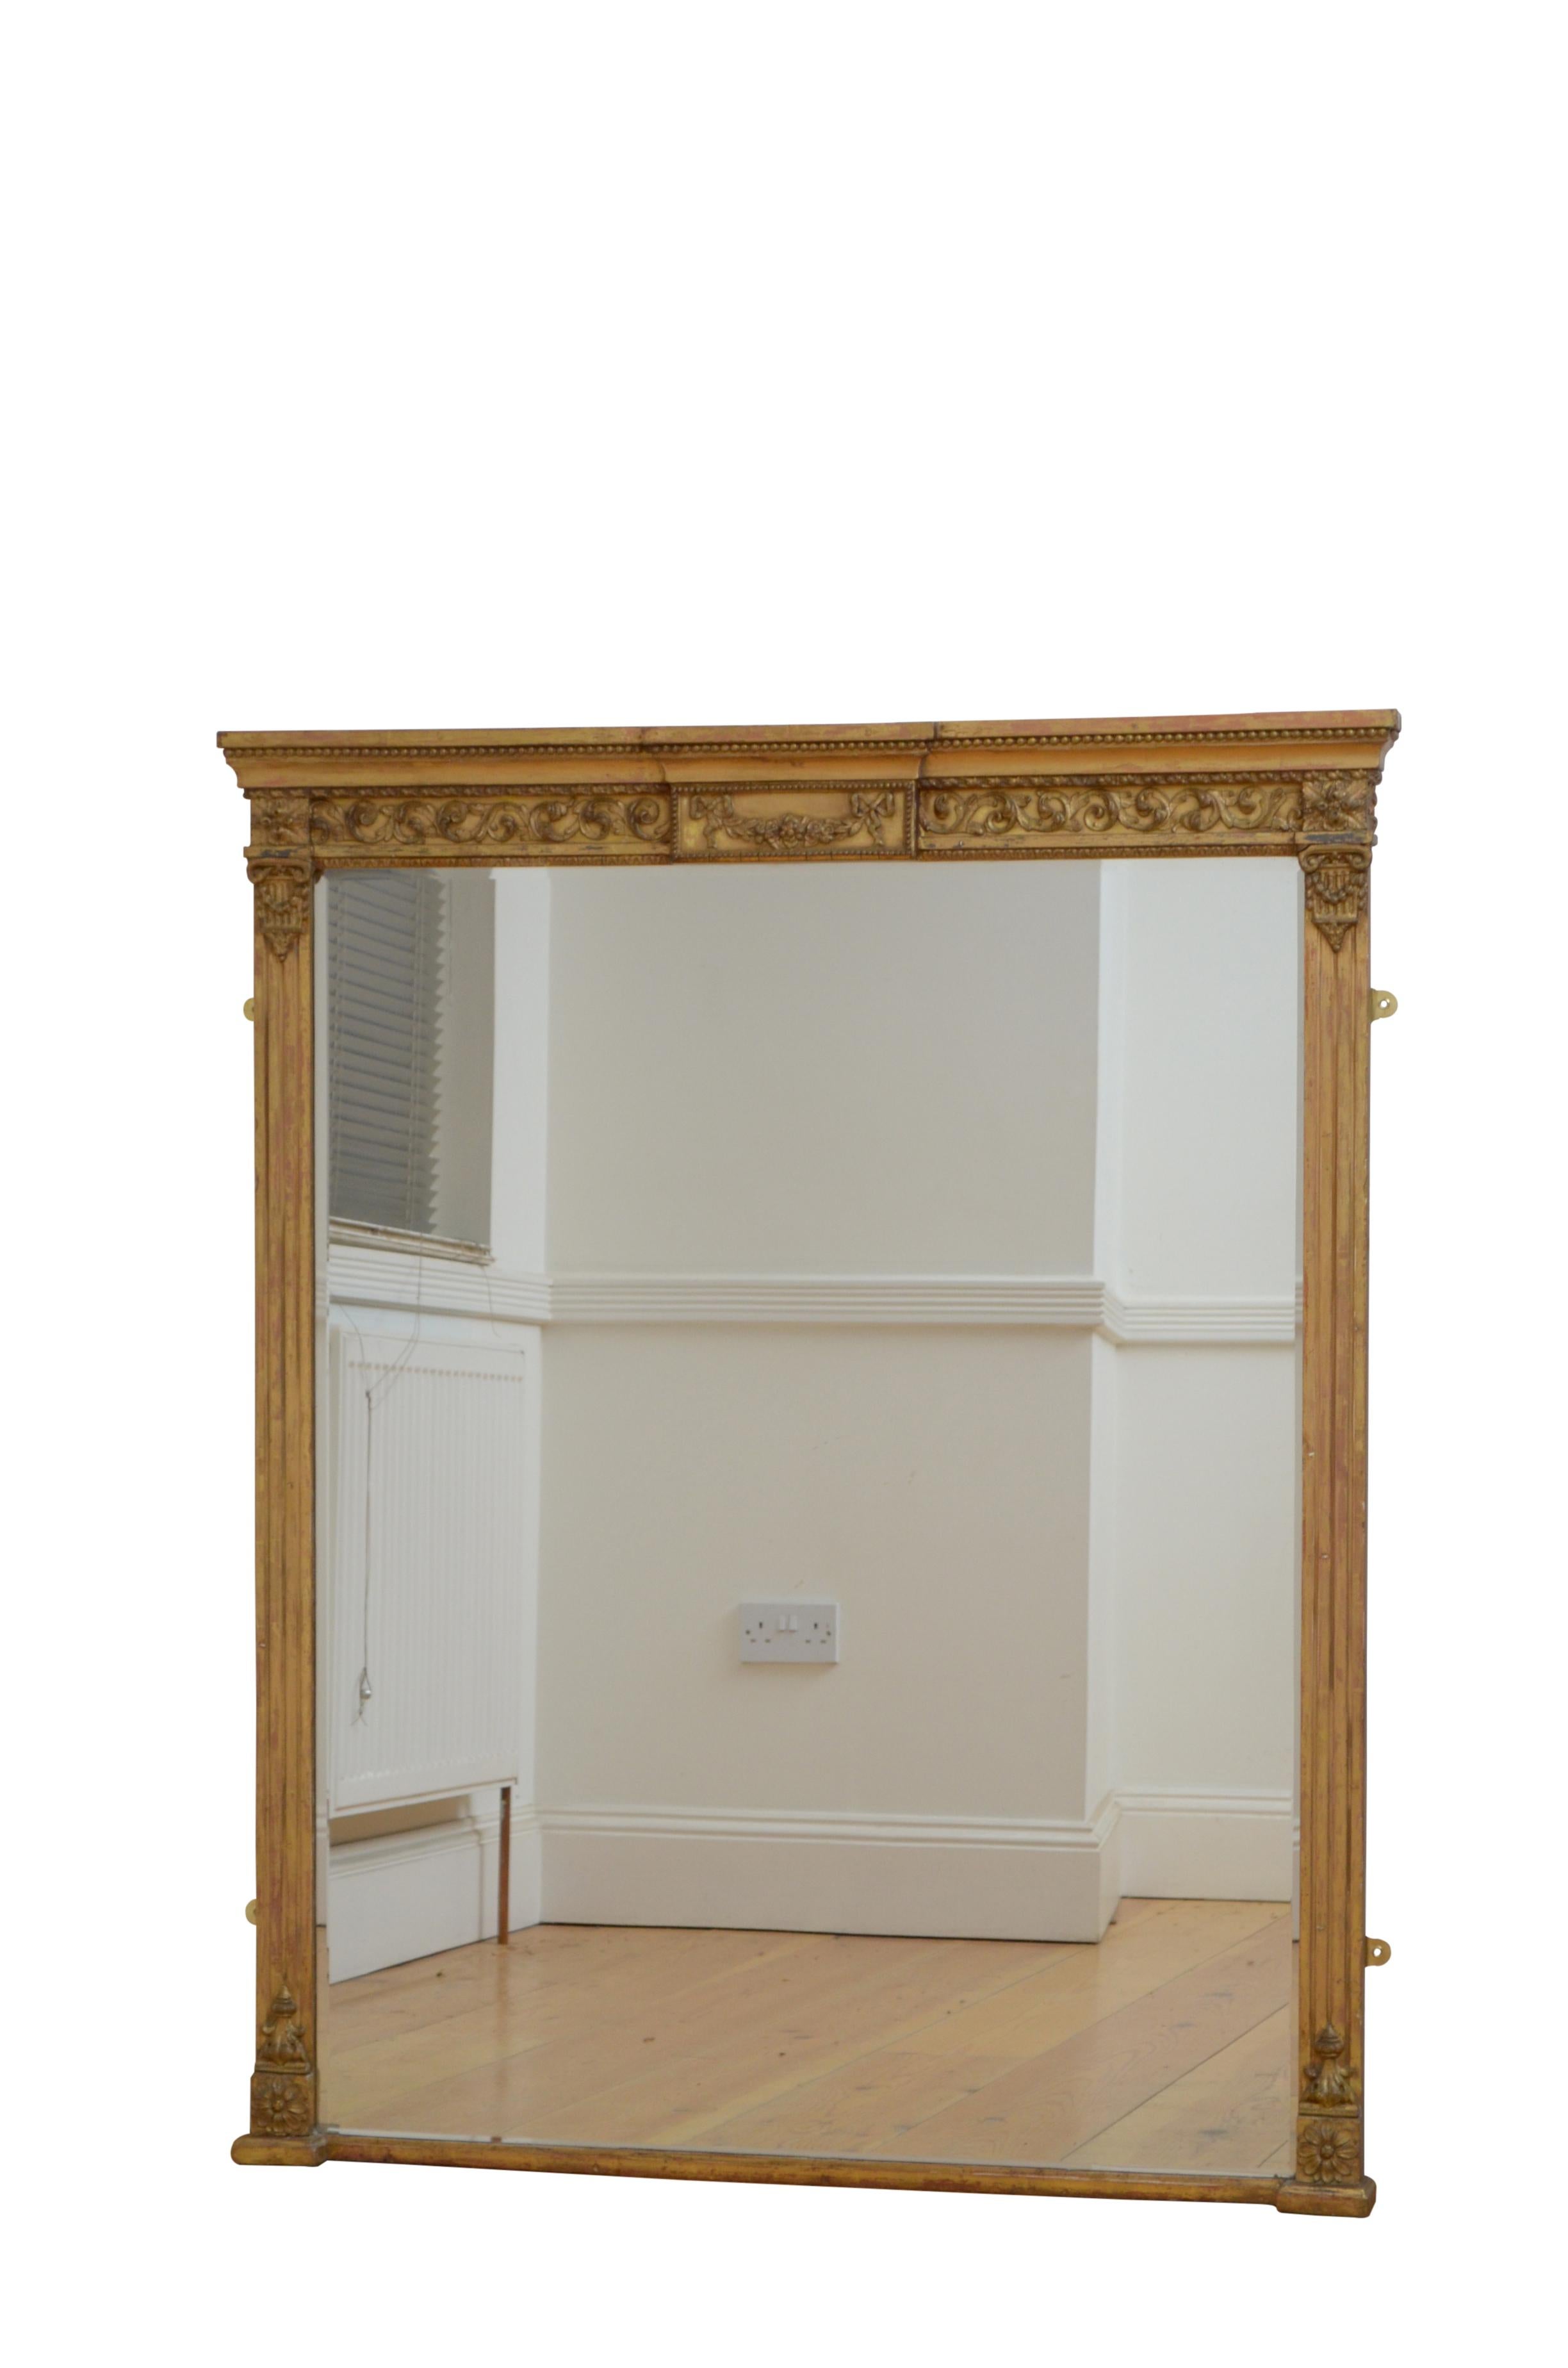 K0581 Fine Late Victorian gilded wall mirror, having original bevelled edge glass with minor imperfections, in gilded frame with moulded cornice, carved with ‘les pearls’ which symbolises strand of pearls and neo classical scrolls all flanked by